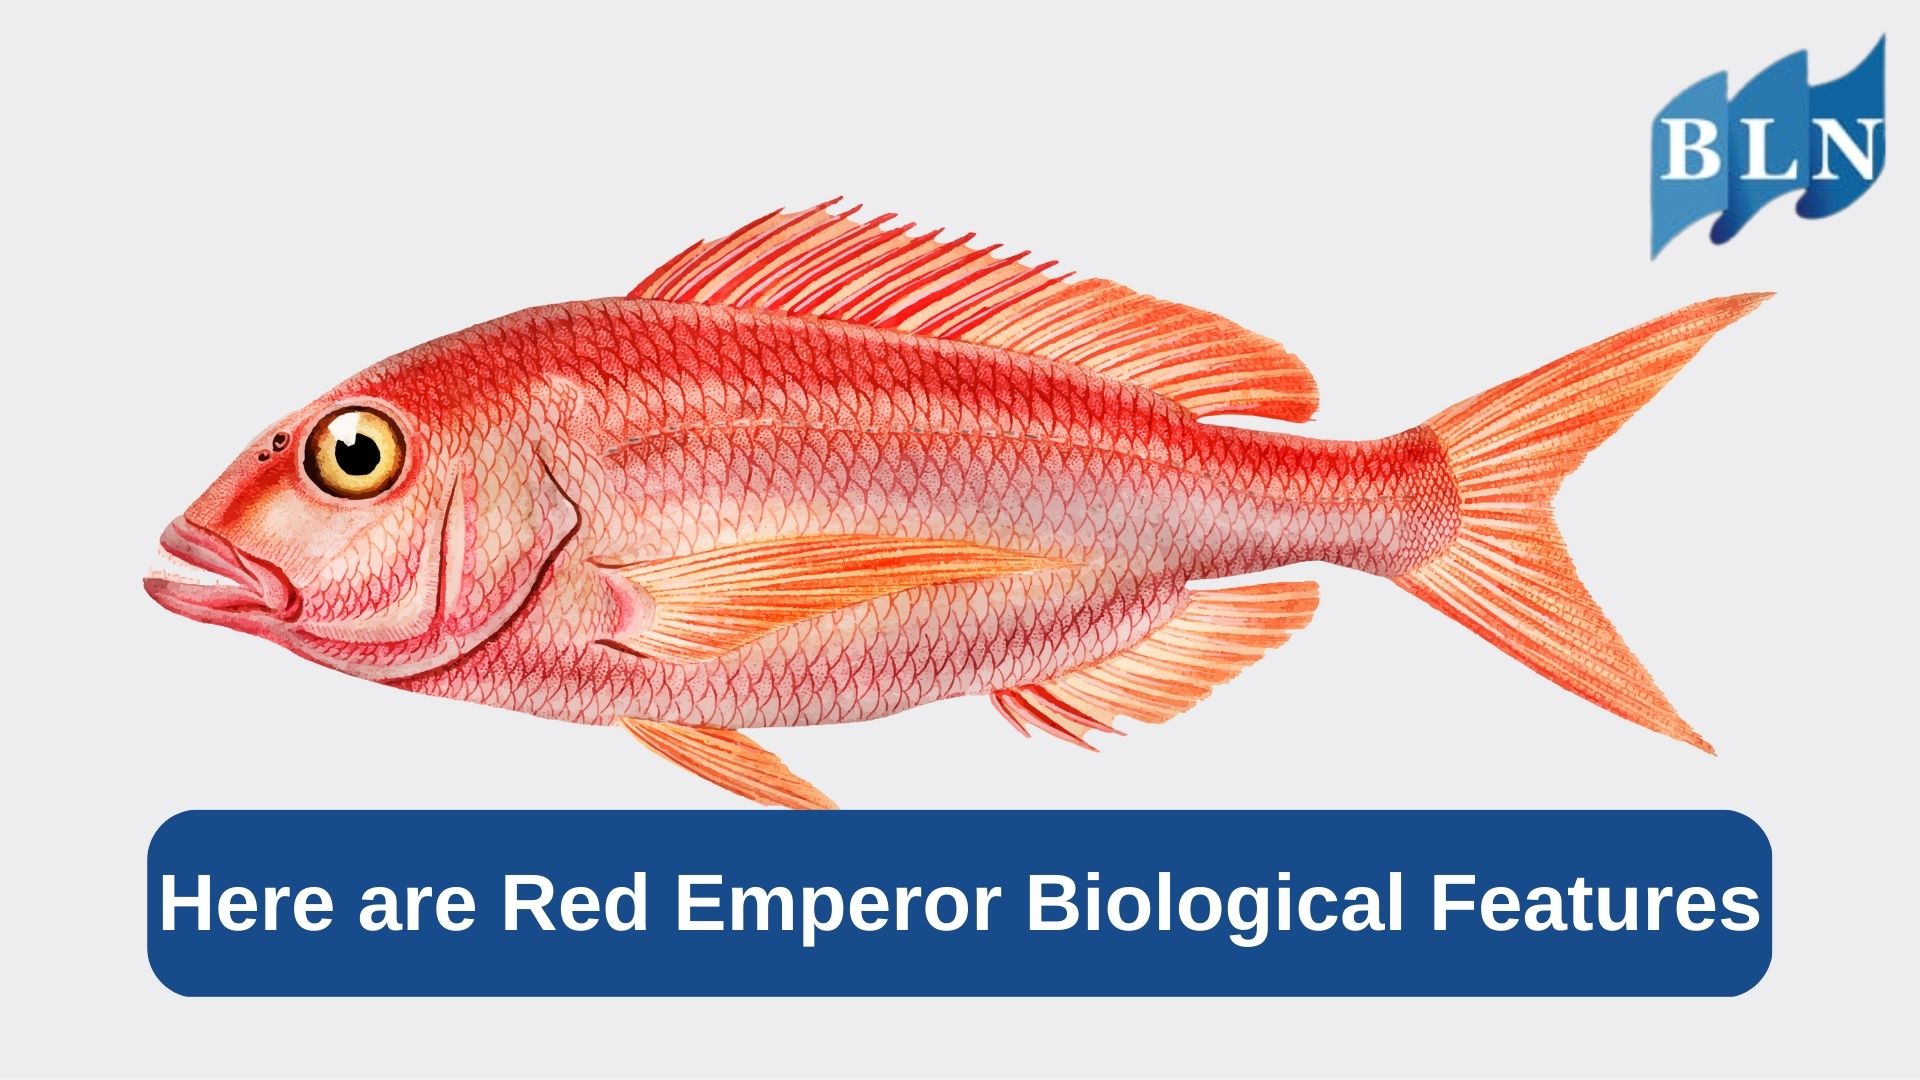 Here are Red Emperor Biological Features